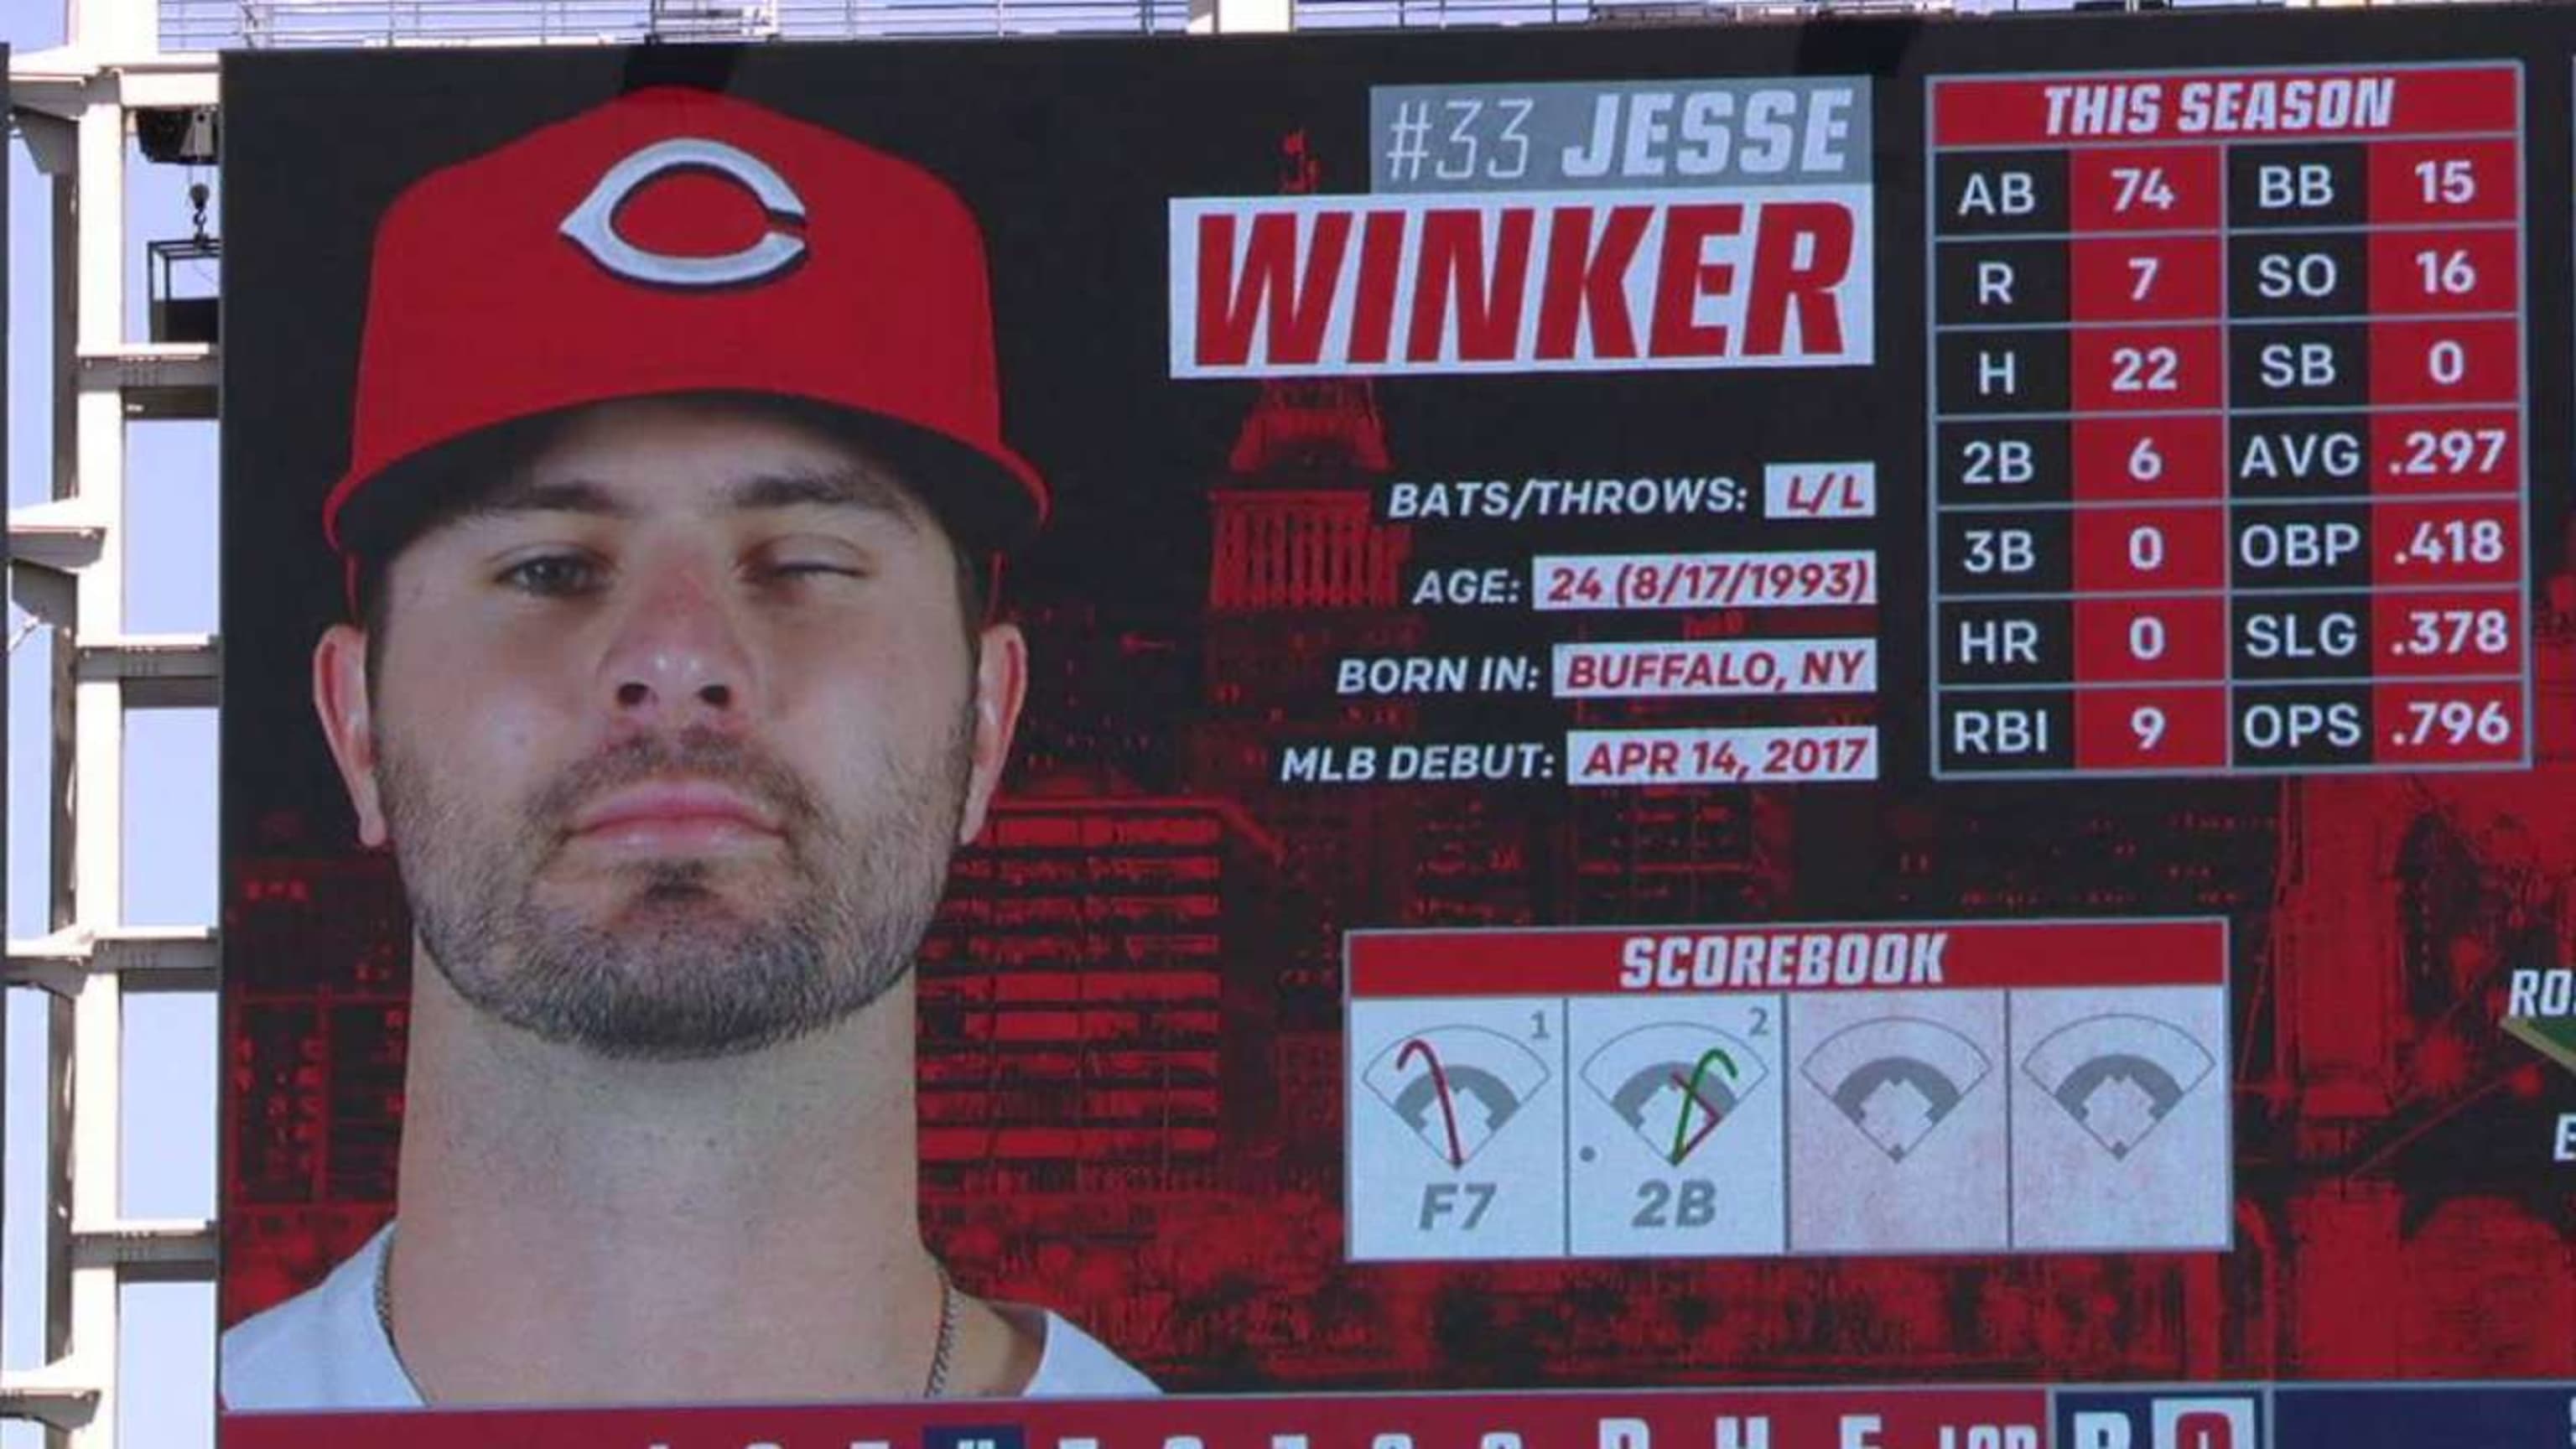 More than a Wink: How Good Can Jesse Winker Be?